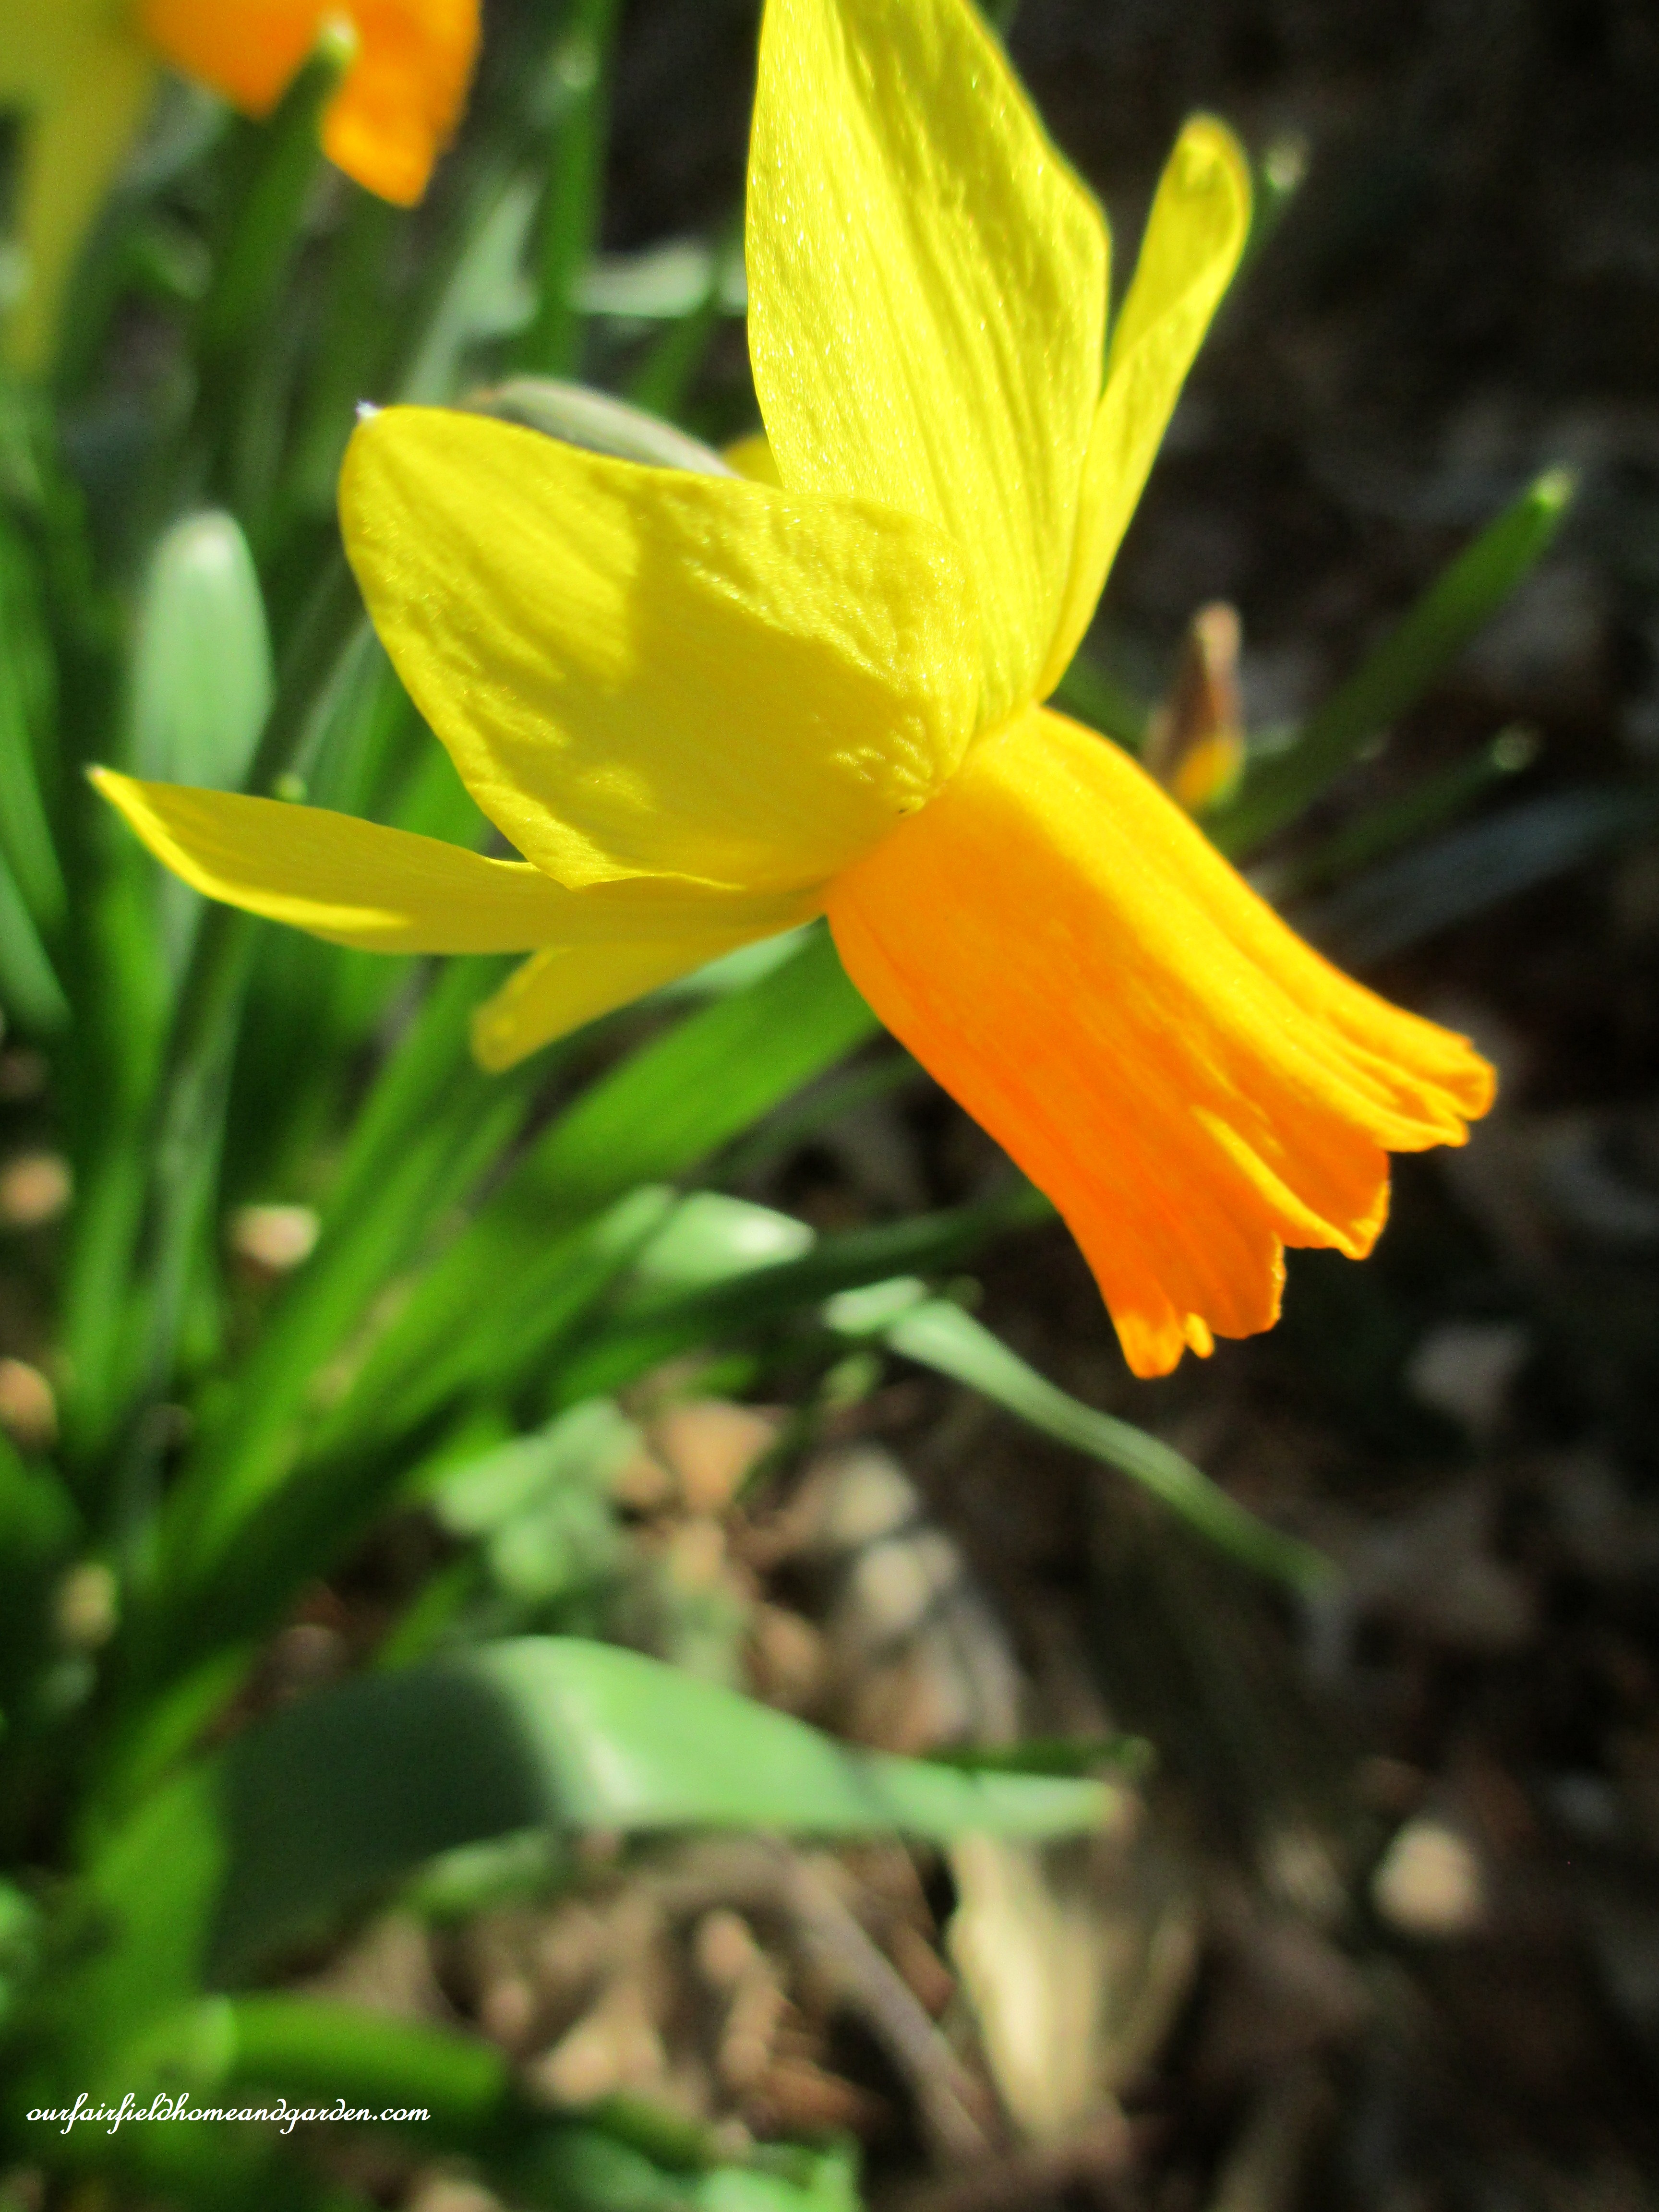 narcissus https://ourfairfieldhomeandgarden.com/signs-of-spring-at-our-fairfield-home-garden/